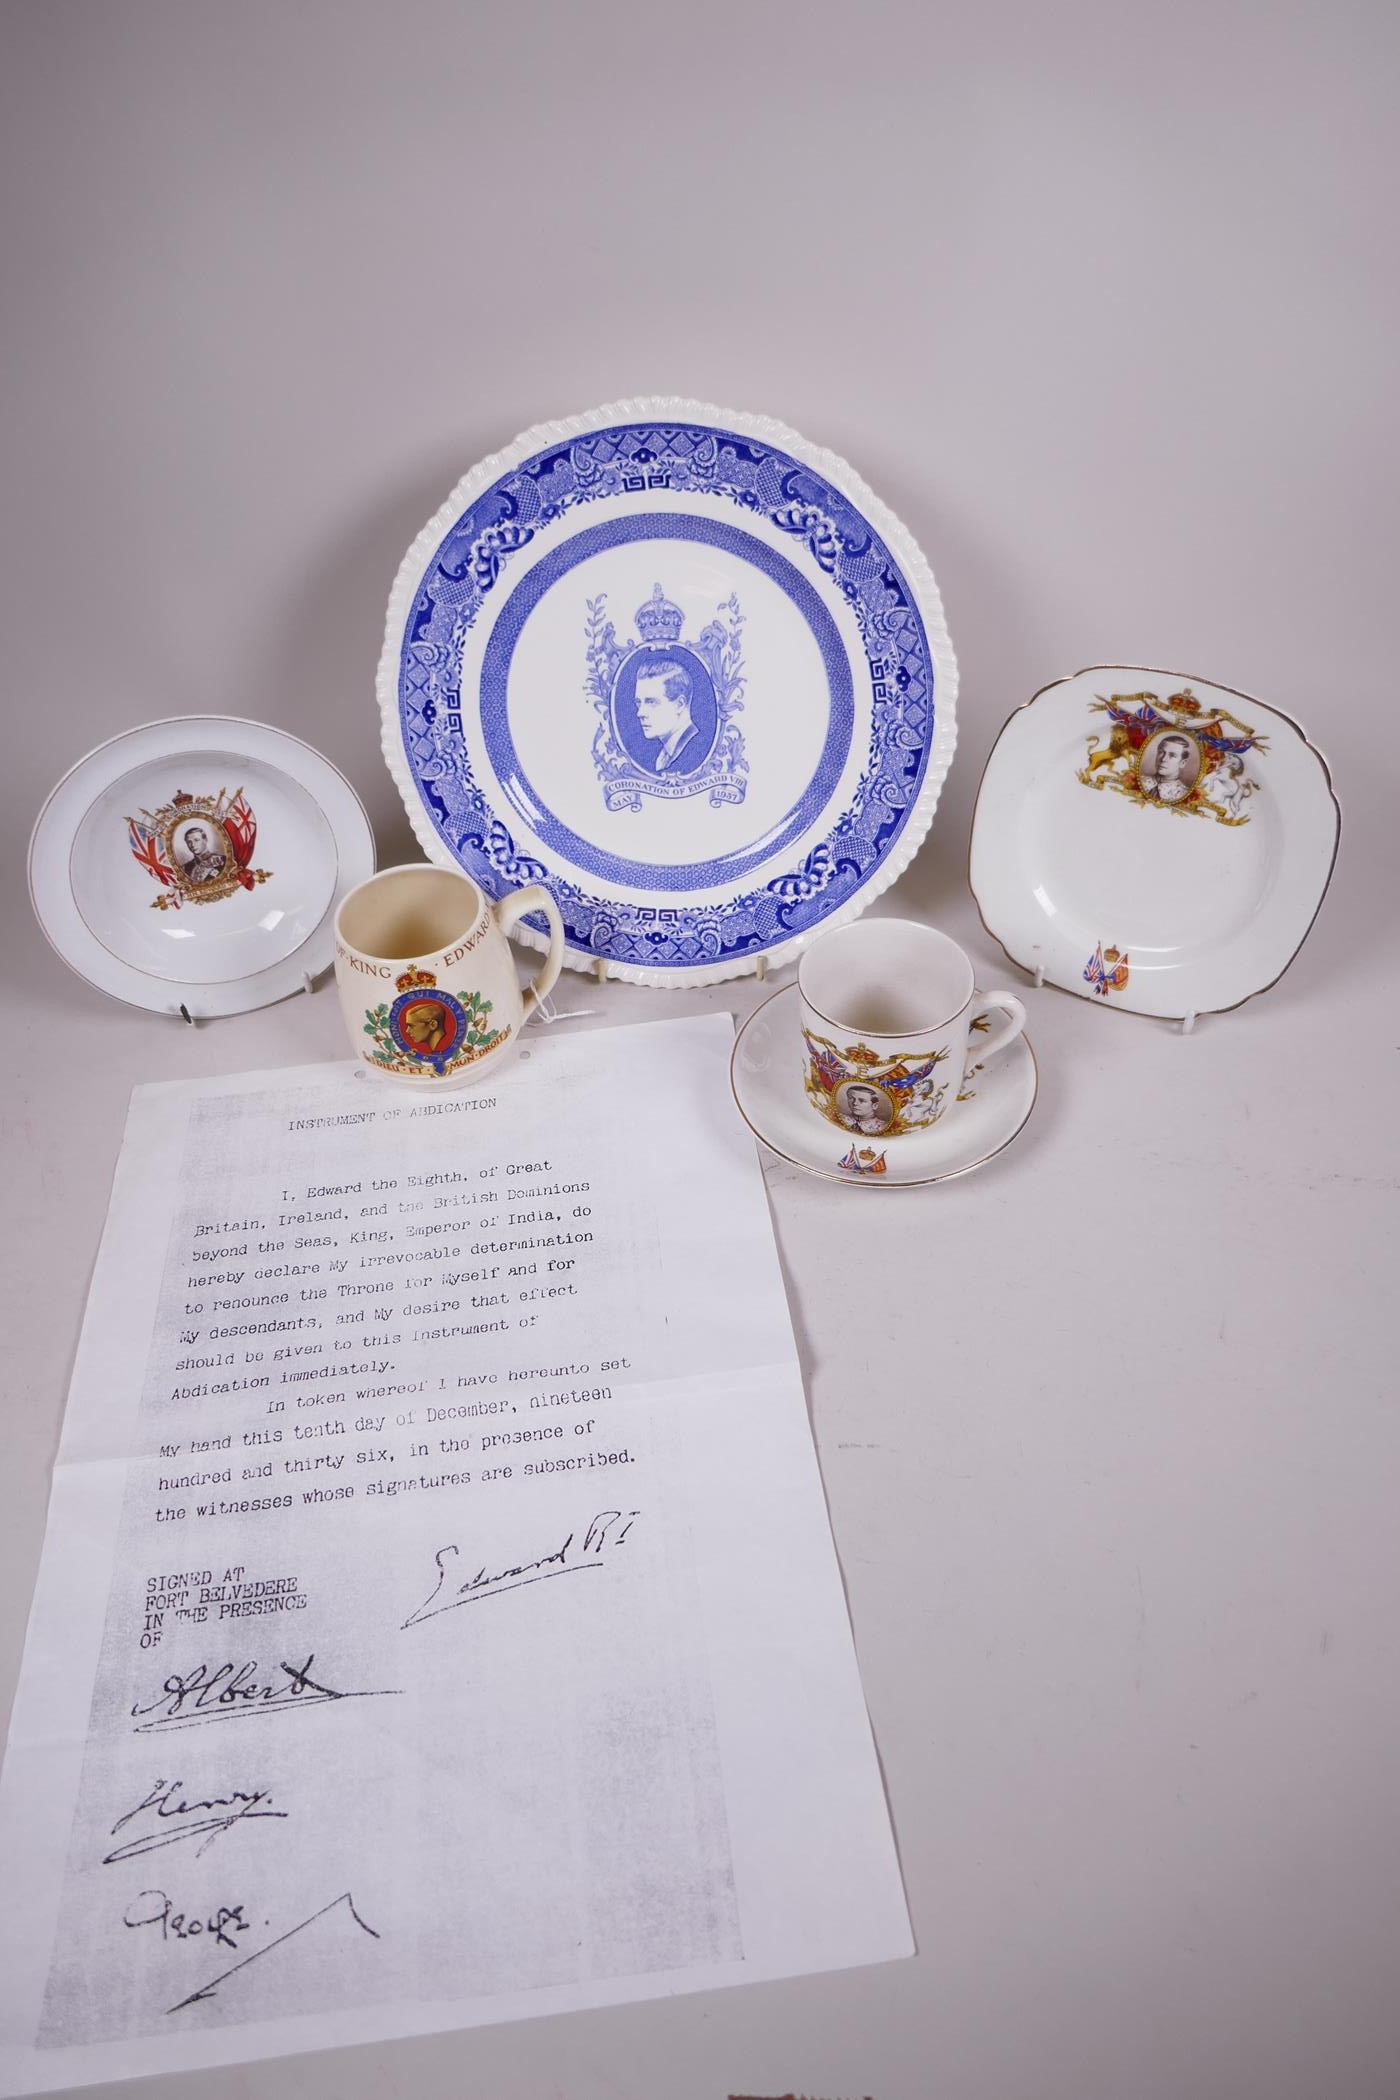 Rare commemoratives issued in 1936 for the Coronation of Edward VIII which did not take place